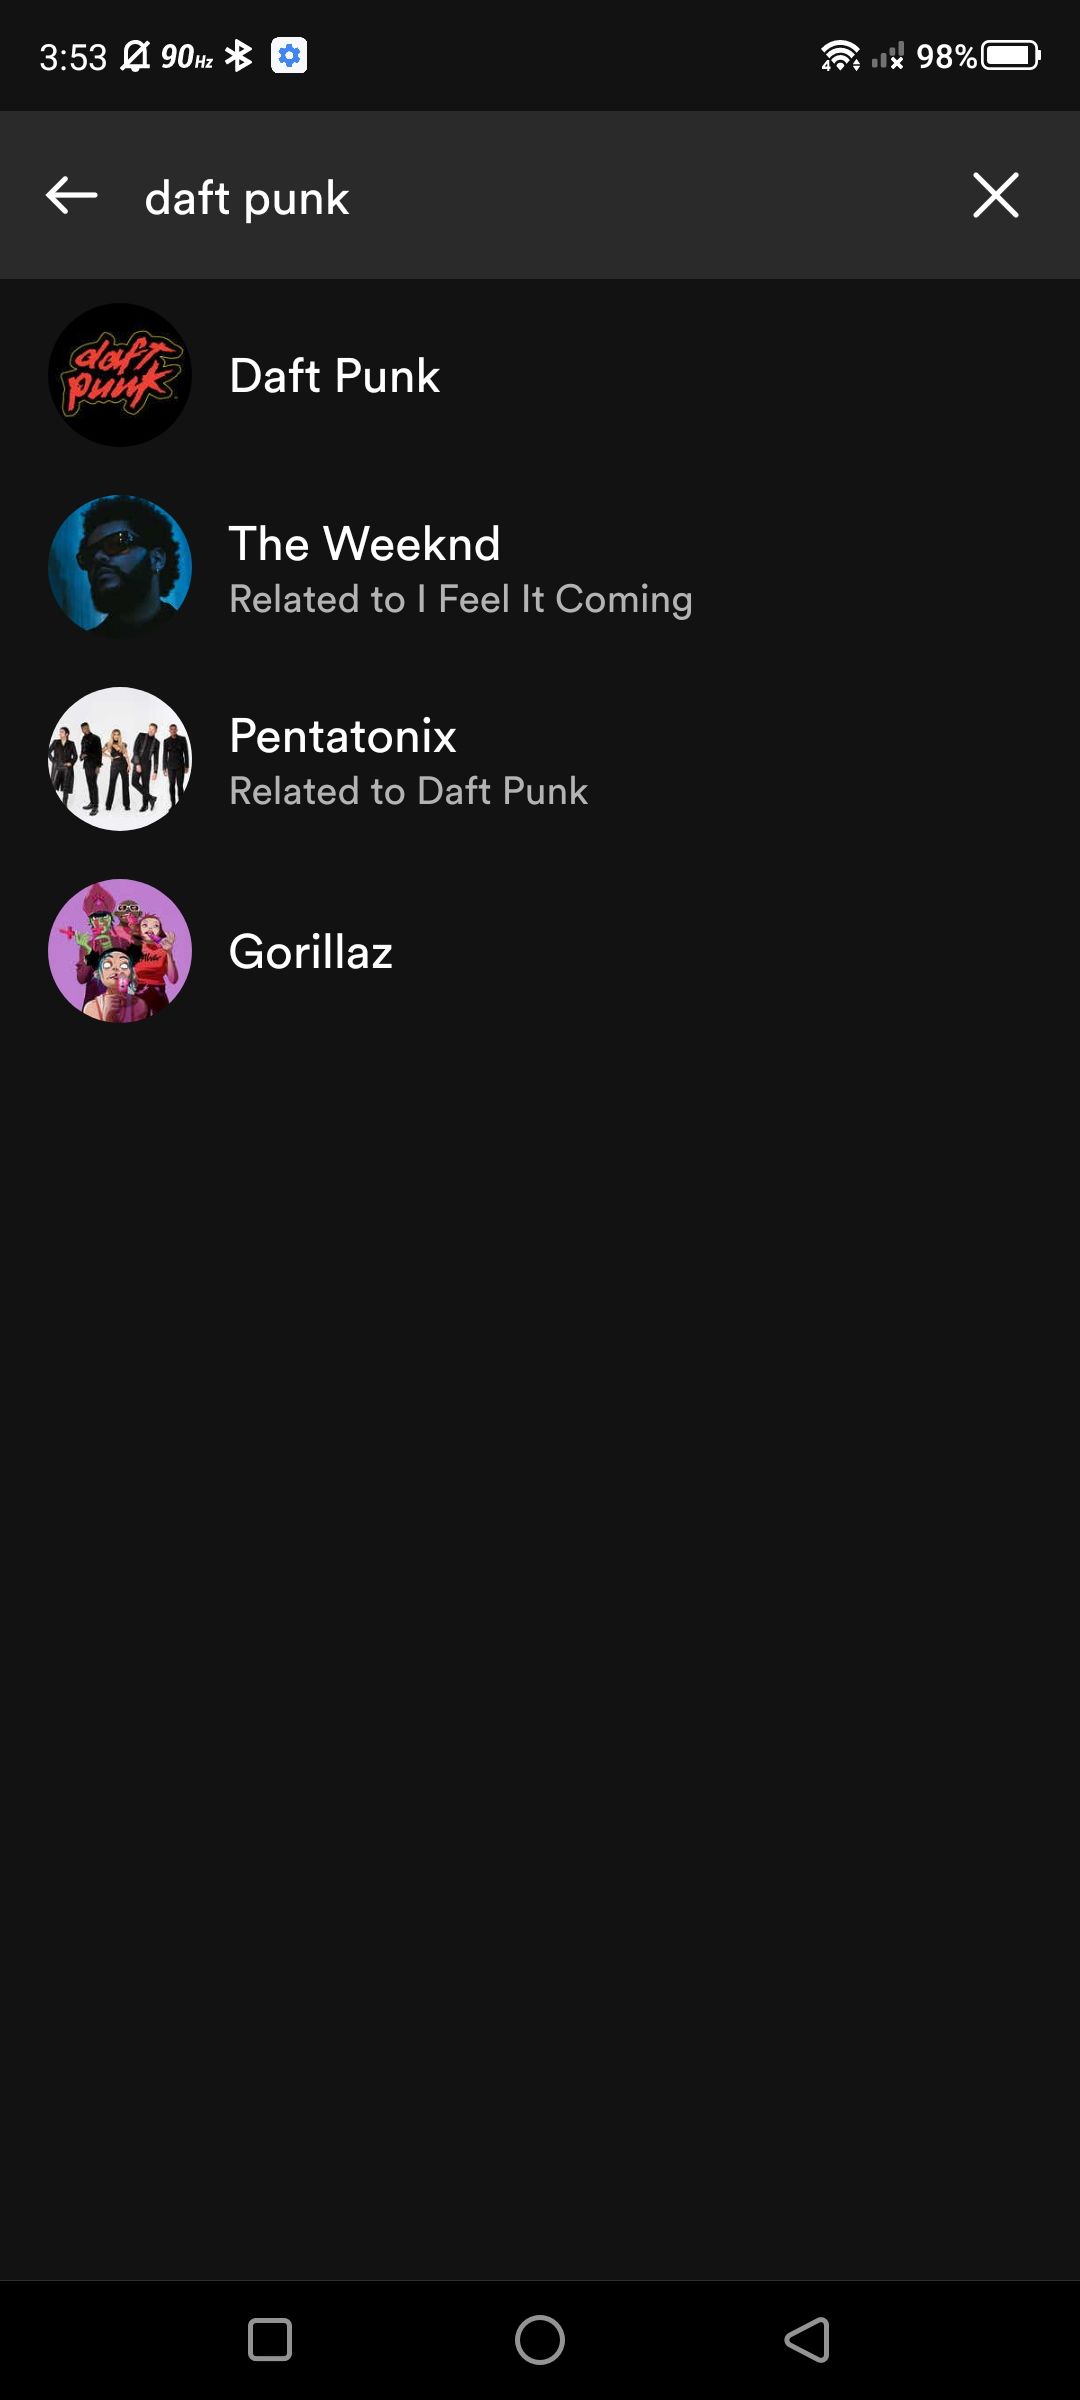 Screenshot of the getting started page (2) of the Spotify app